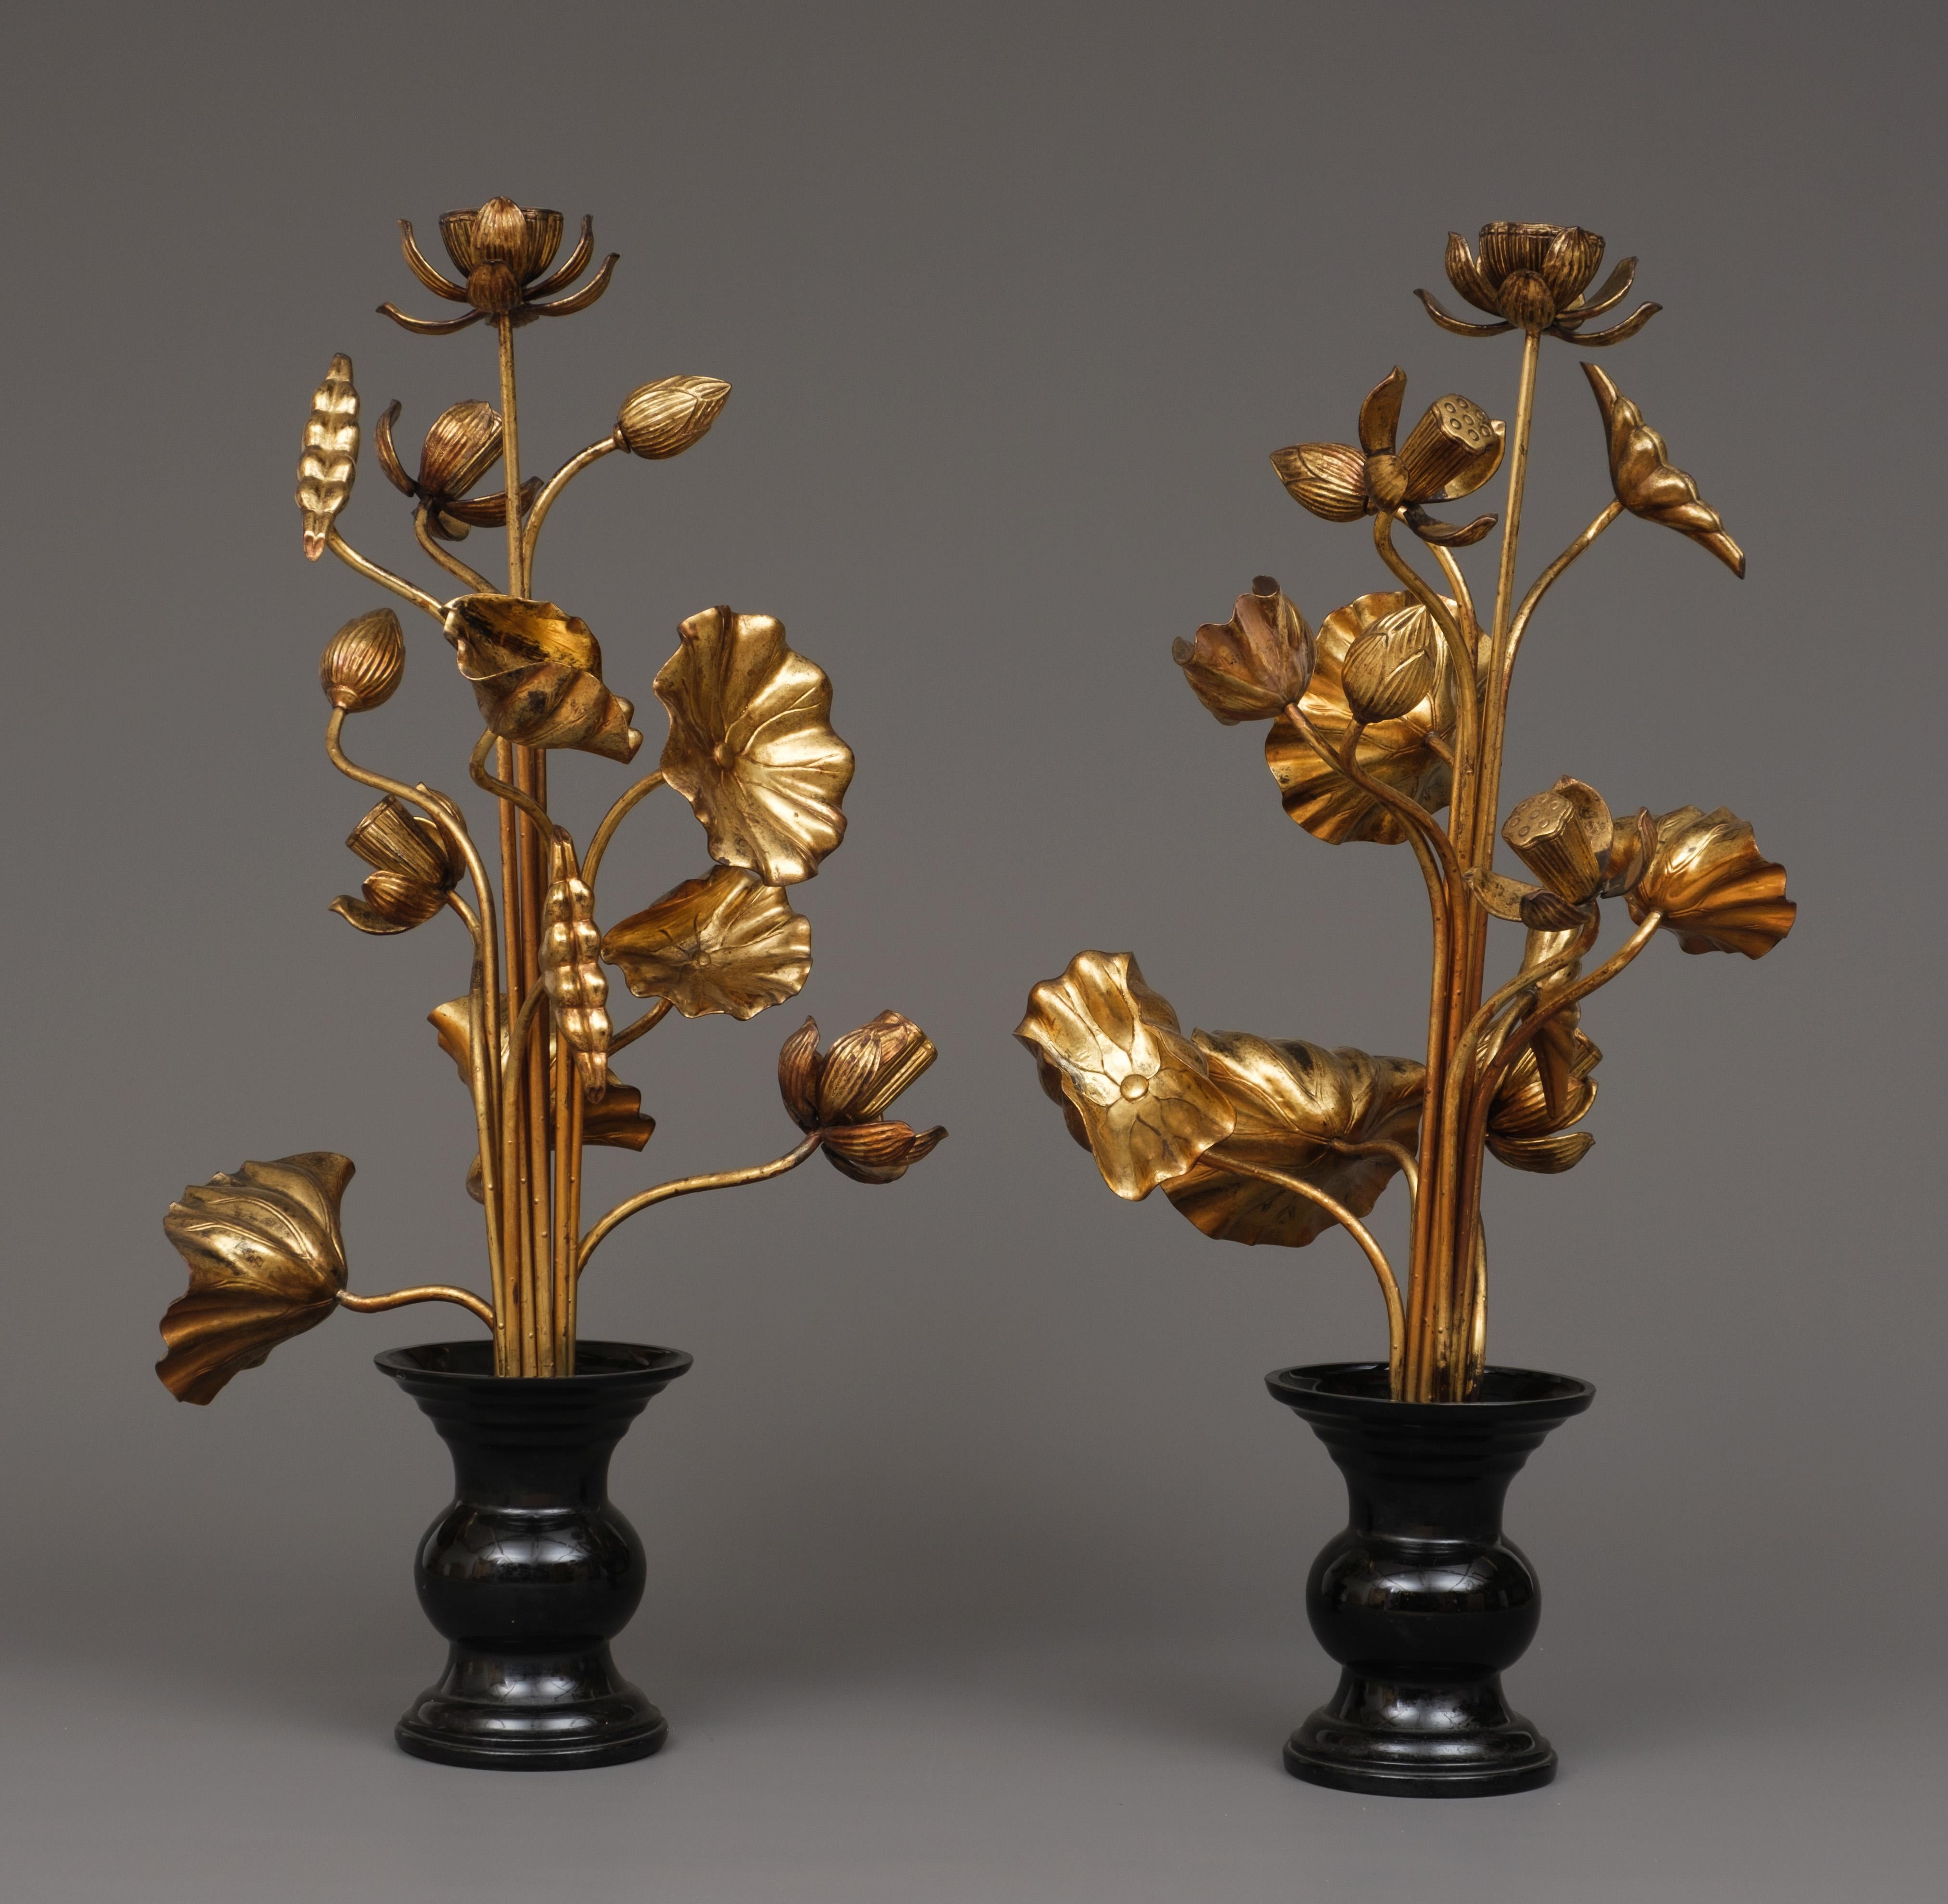 Large pair of Japanese ‘Jyôka’ 常花, sets of gilded lotus flowers and -leaves. For Sale 1